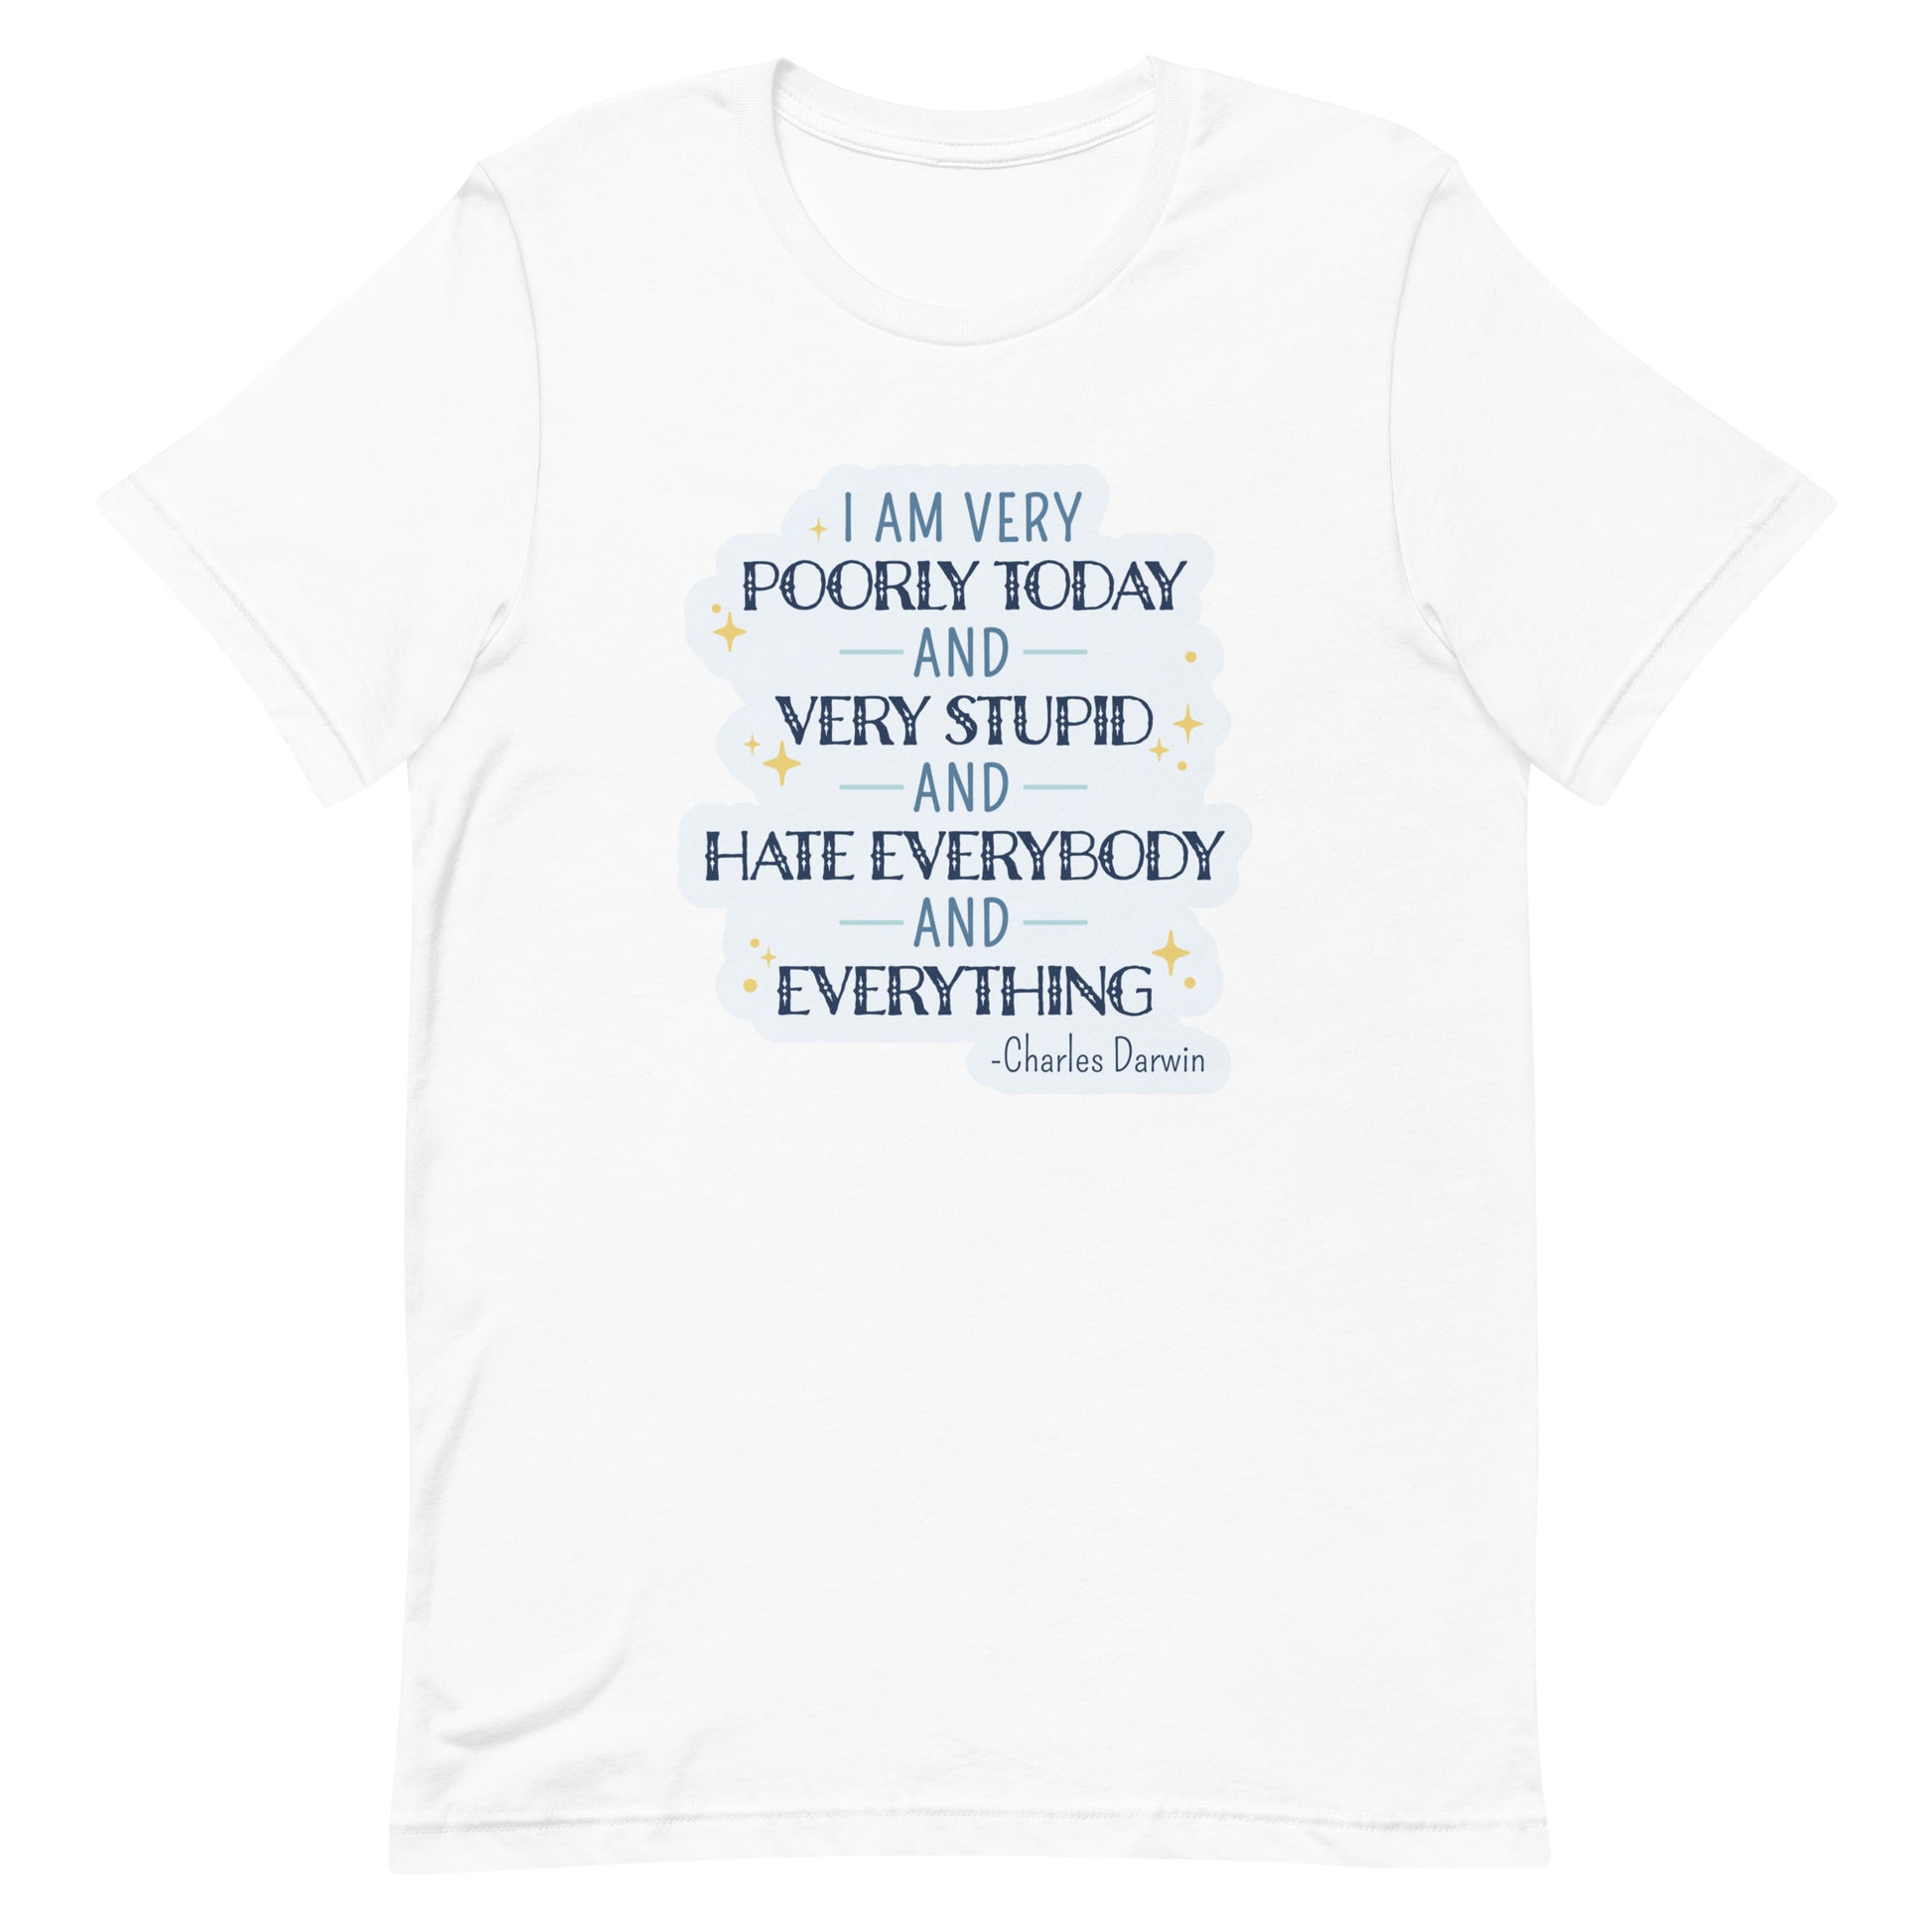 A white crewneck t-shirt featuring a quote from Charles Darwin in blue text. The quote reads "I am very poorly today and very stupid and hate everybody and everything".